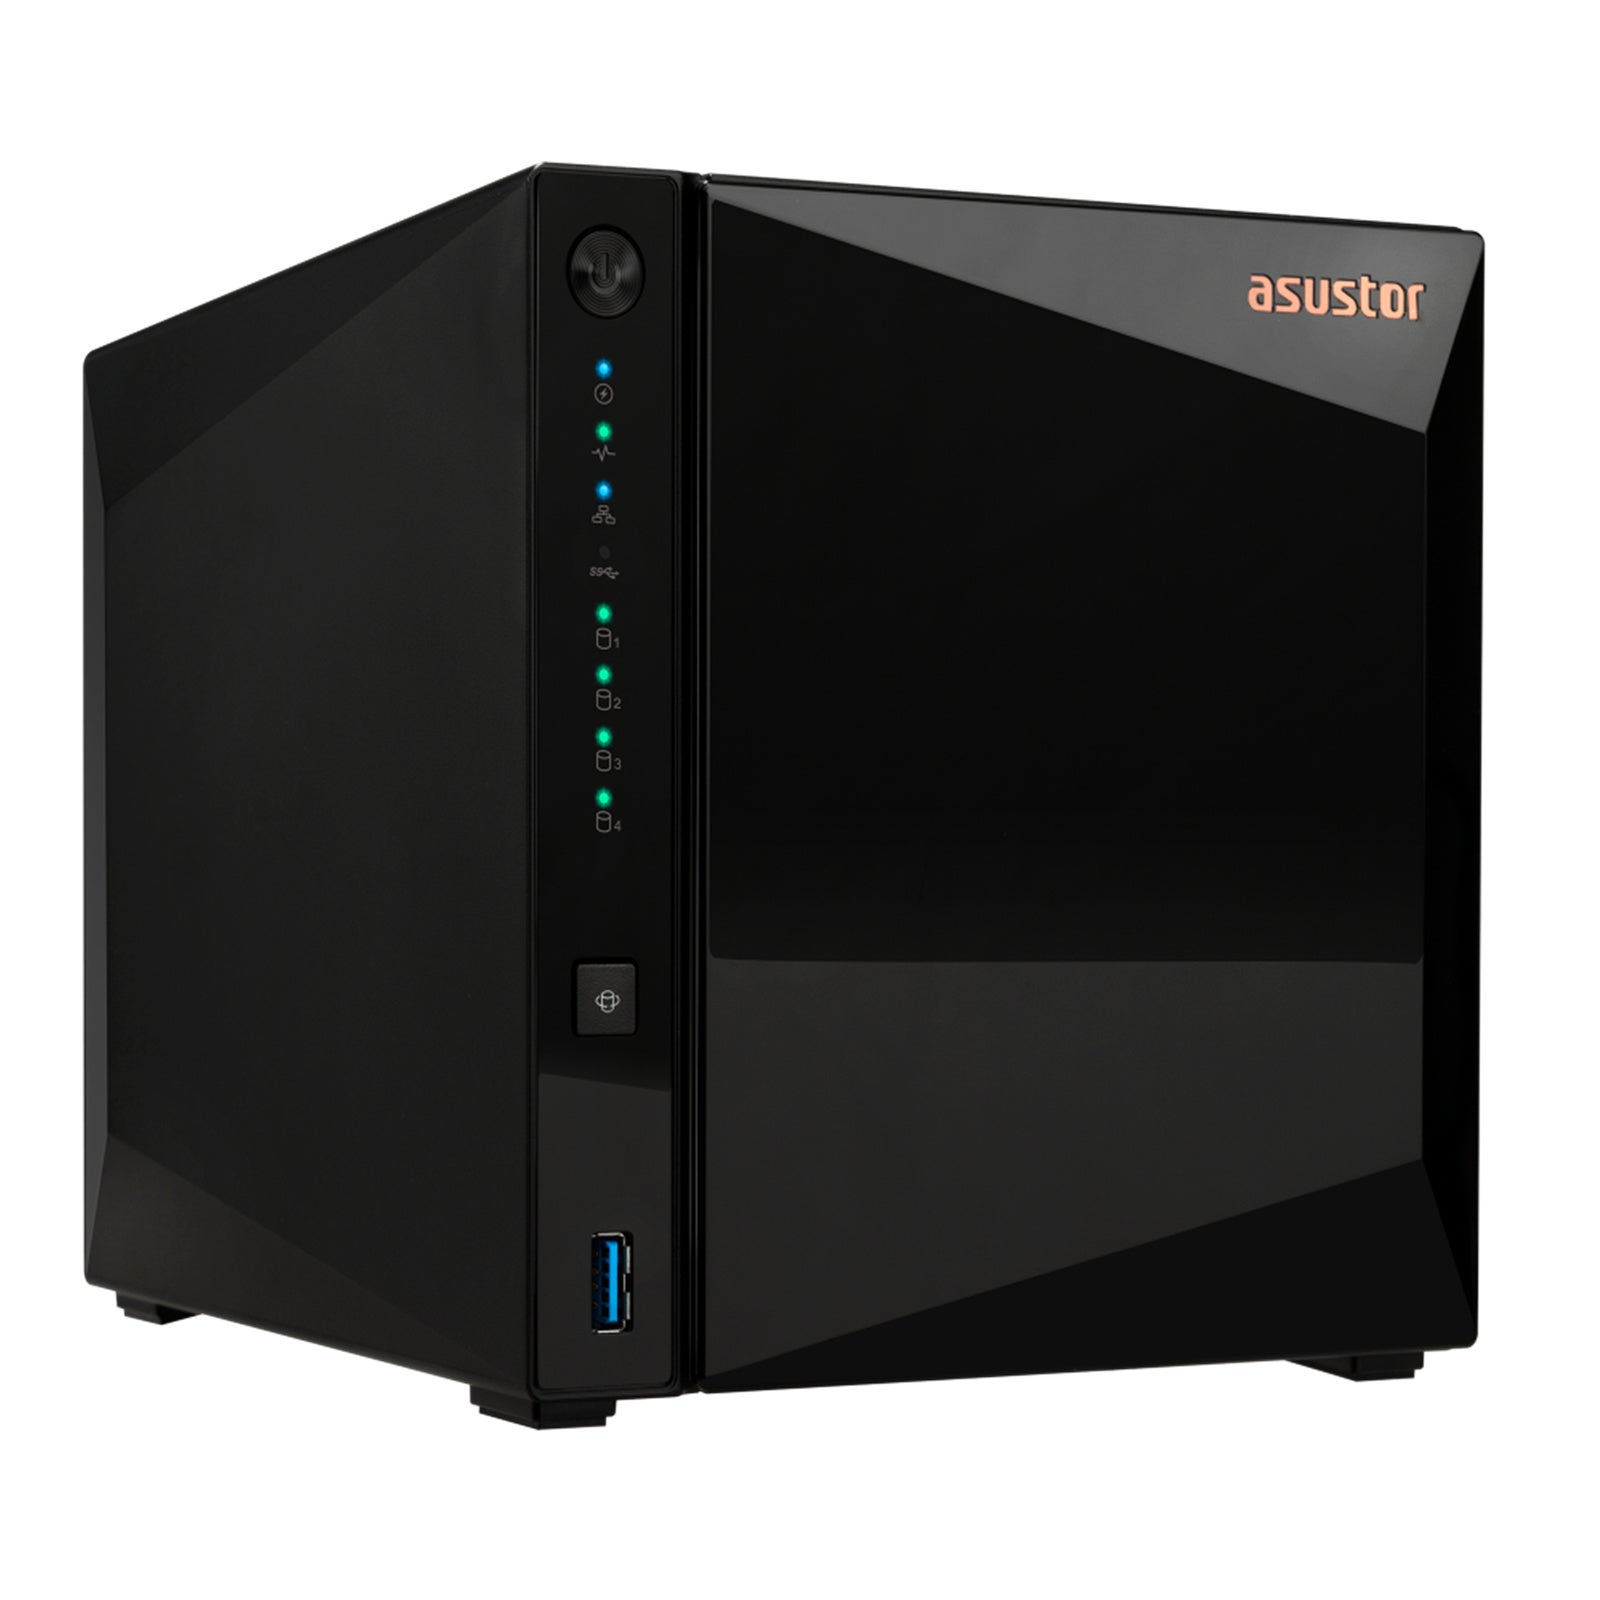 Asustor AS3304T 4-Bay NAS, Quad Core ARM RTD1296 1.4GHz, 2GB RAM, 1x 2.5G/1GbE LAN, 3x USB3.2 Type-A, 3 Years Warranty [AS3304T]